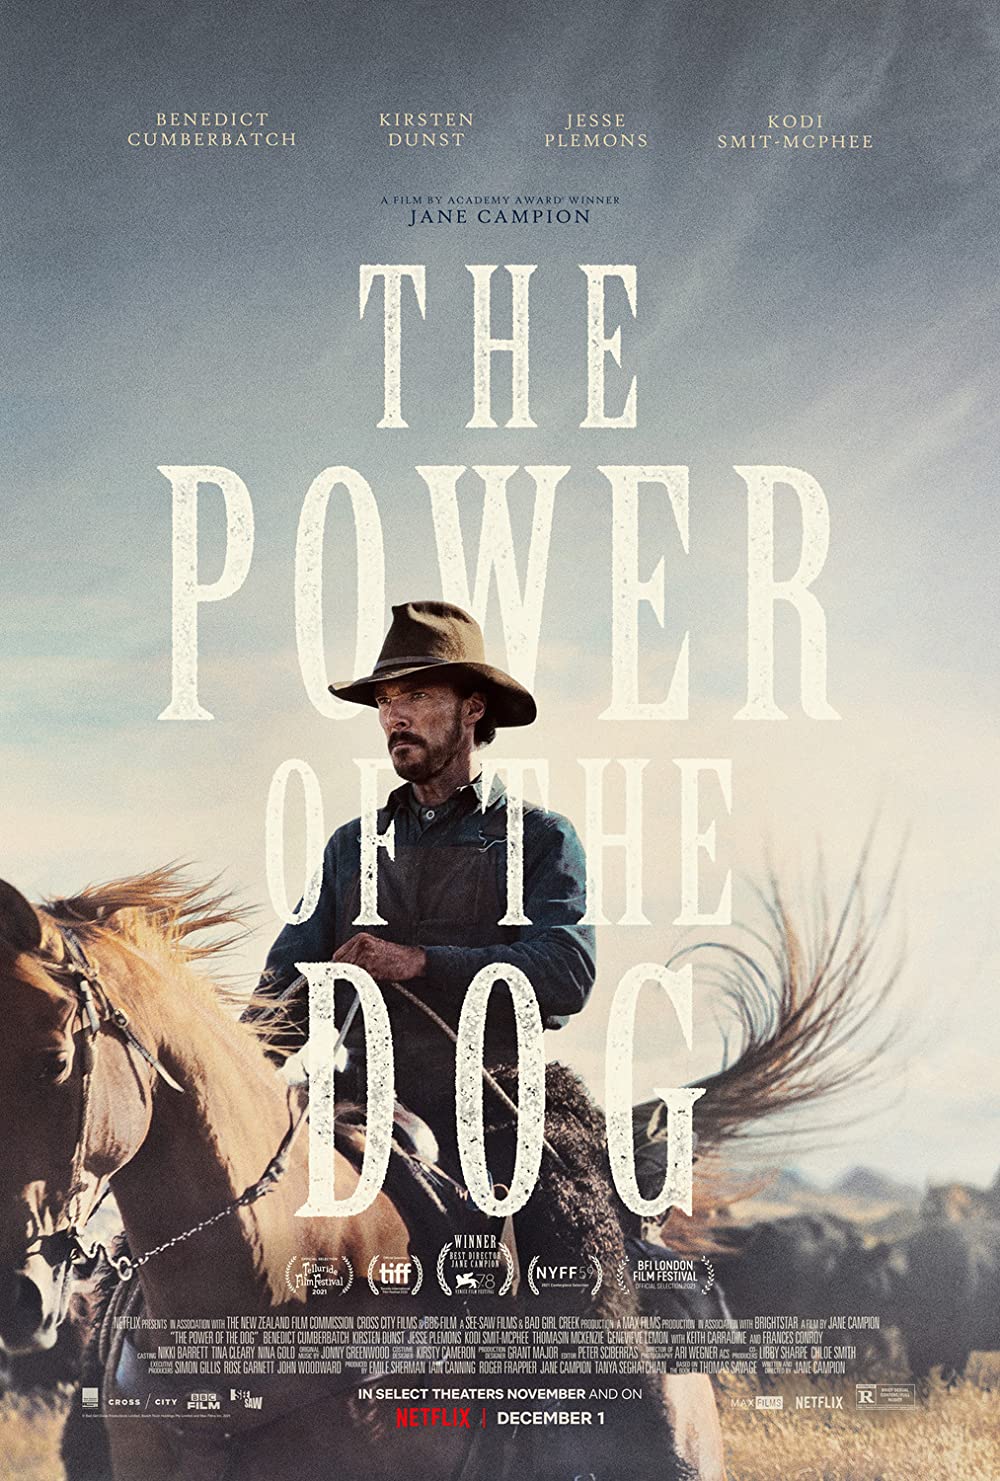 No spoilers: “The Power of the Dog” film review